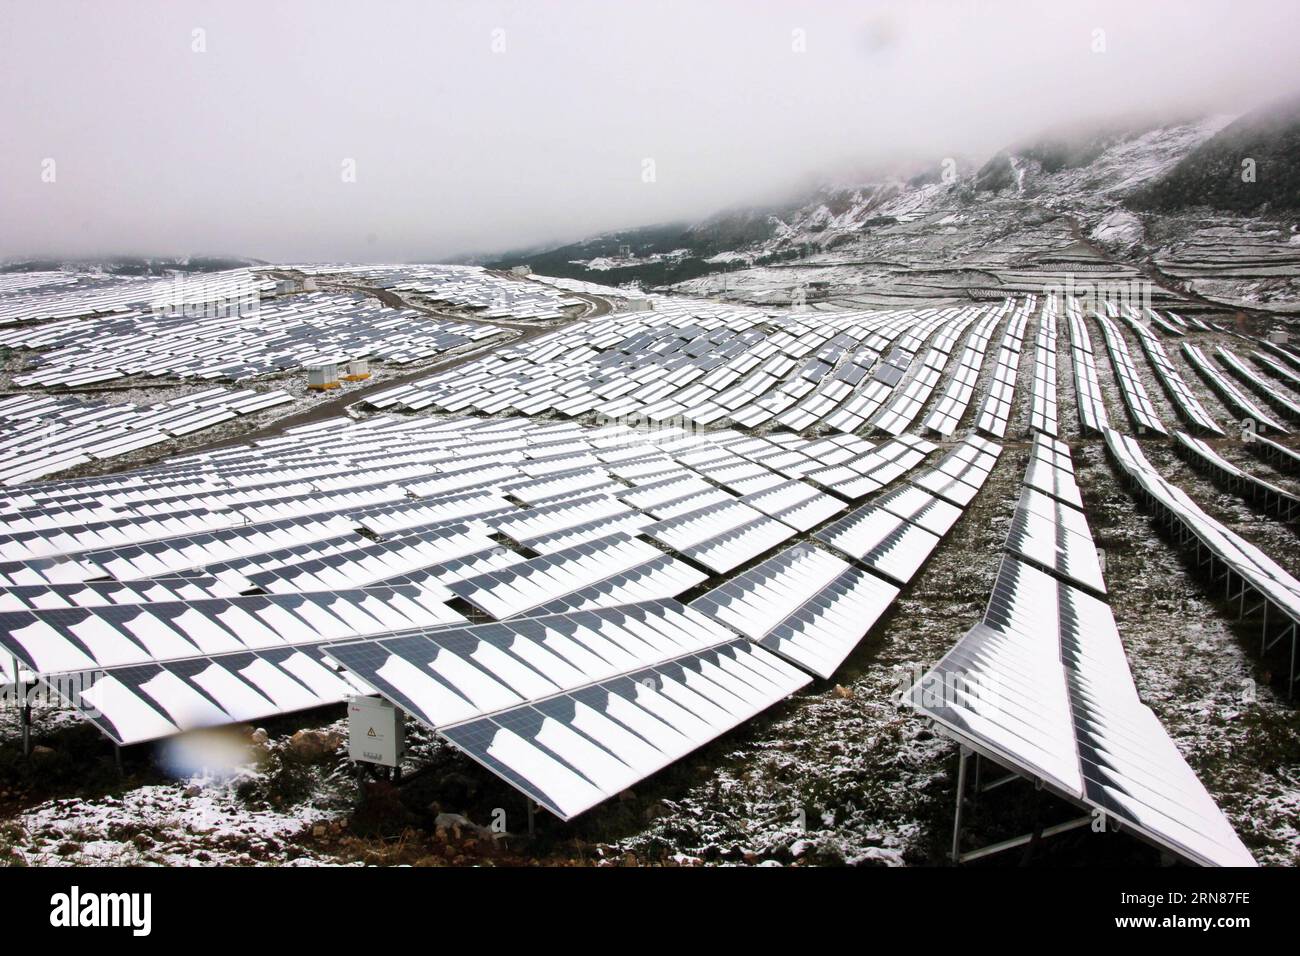 (151010) -- BIJIE, Oct. 10, 2015 -- Photo taken on Oct. 10, 2015 shows the snow-covered solar panels in Haila village, Weining county, southwest China s Guizhou Province. The county witnessed a snowfall and a sudden drop in temperature on Saturday. ) (wyo) CHINA-GUIZHOU-WEATHER-SNOWFALL (CN) WangxCheng PUBLICATIONxNOTxINxCHN   Bijie OCT 10 2015 Photo Taken ON OCT 10 2015 Shows The Snow Covered Solar Panels in Haila Village Weining County Southwest China S Guizhou Province The County witnessed a snowfall and a Sudden Drop in temperature ON Saturday wyo China Guizhou Weather snowfall CN  PUBLICA Stock Photo